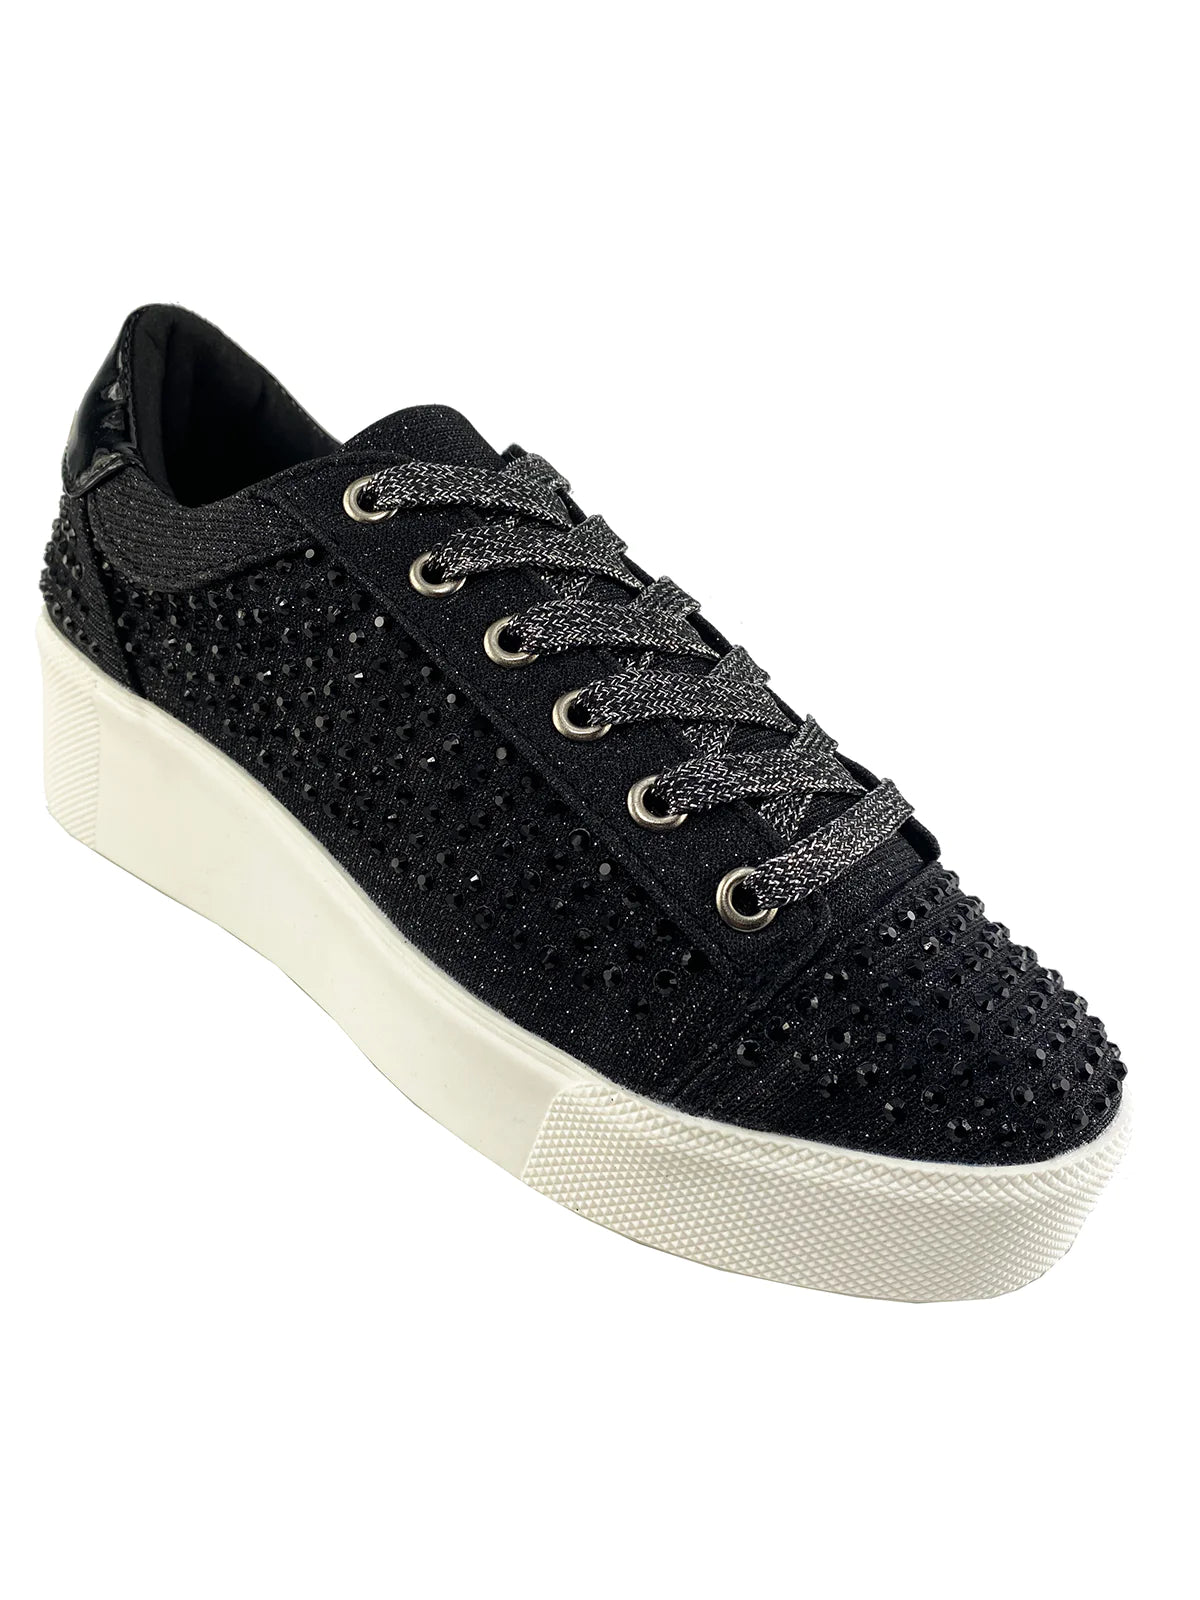 Not Rated Diva Sparkle Sneakers in Black at ooh la la! in Grapevine TX 76051